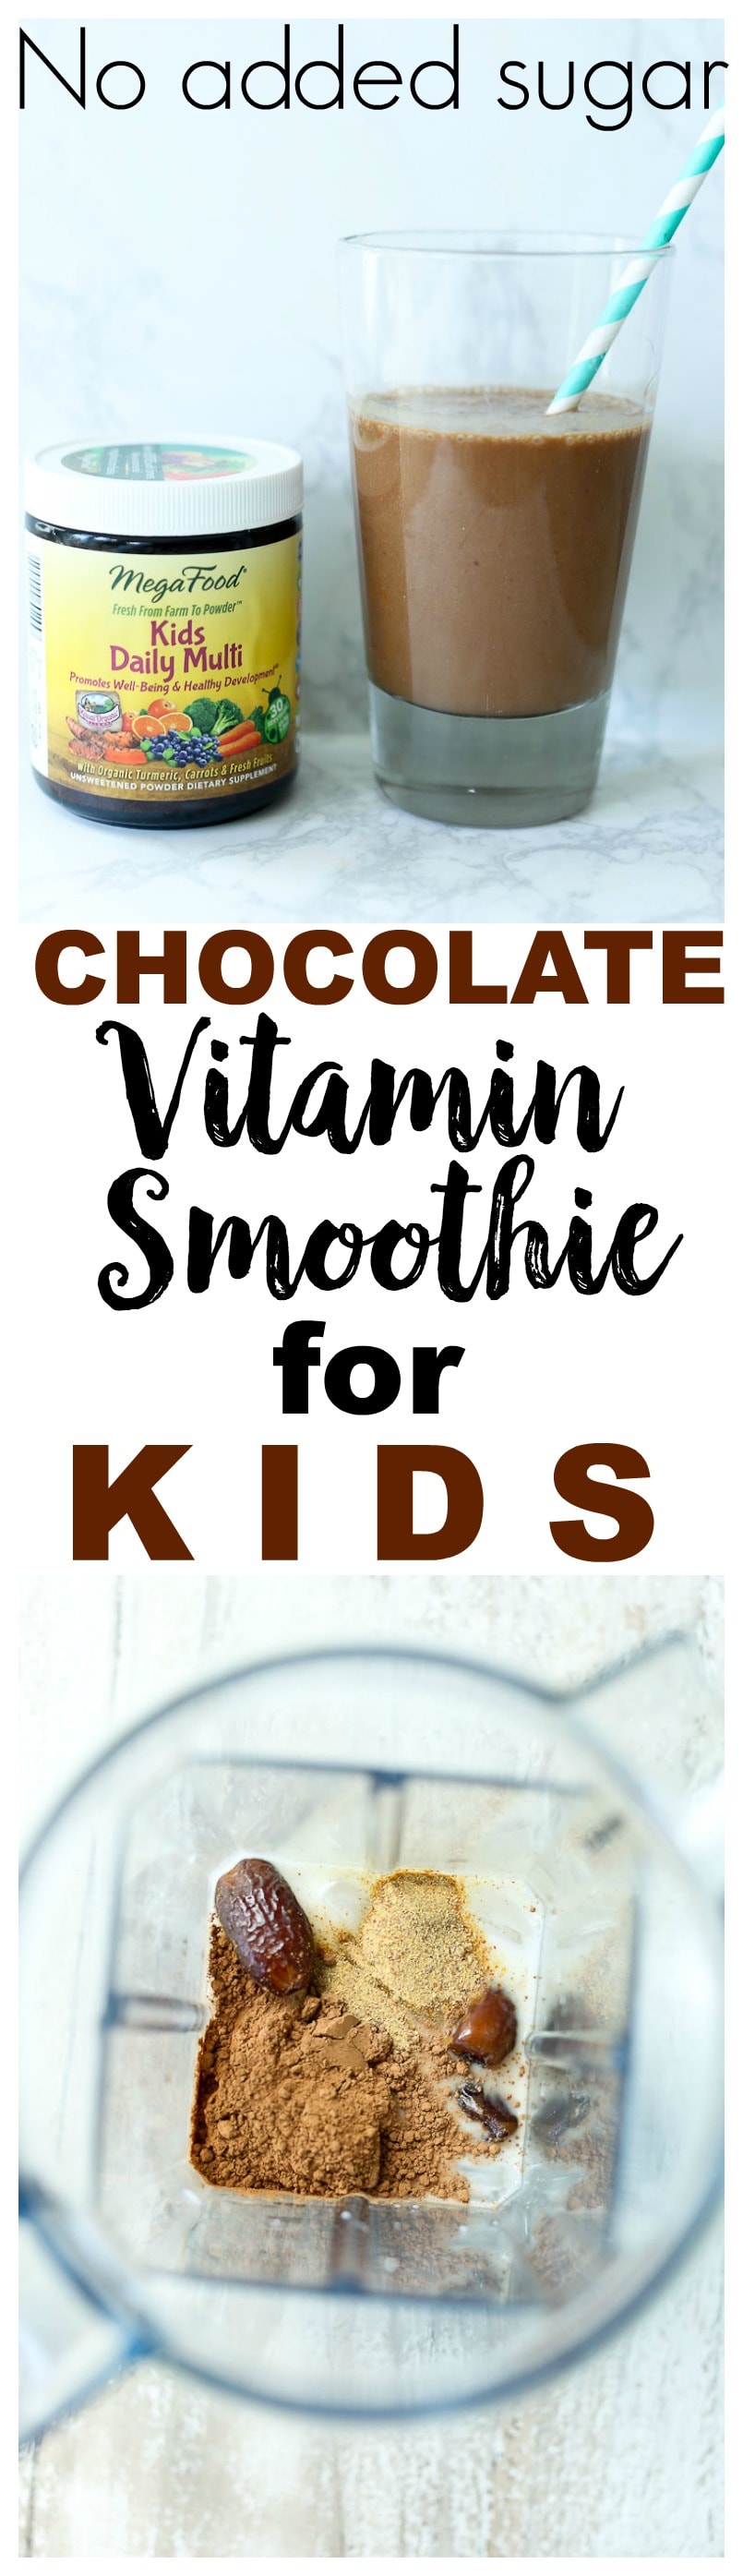 MegaFood Kids Daily Multi Review Chocolate Vitamin Smoothie for Kids